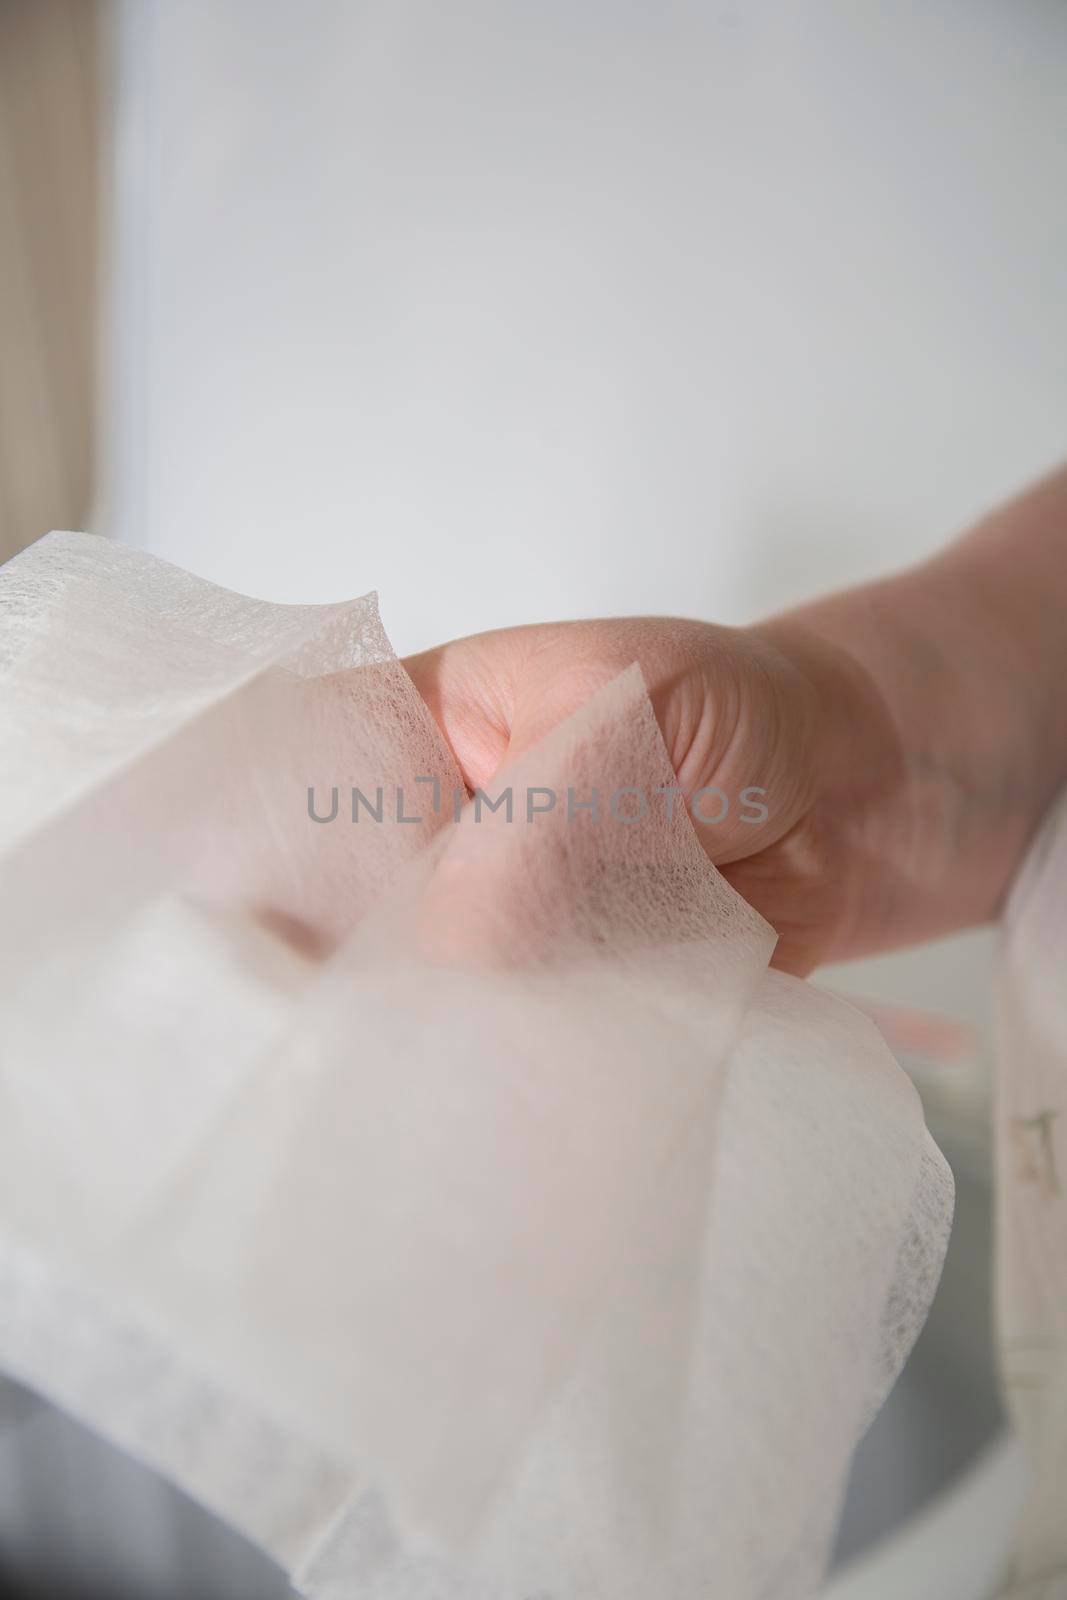 A woman's hand as she holds dryer sheets for laundry